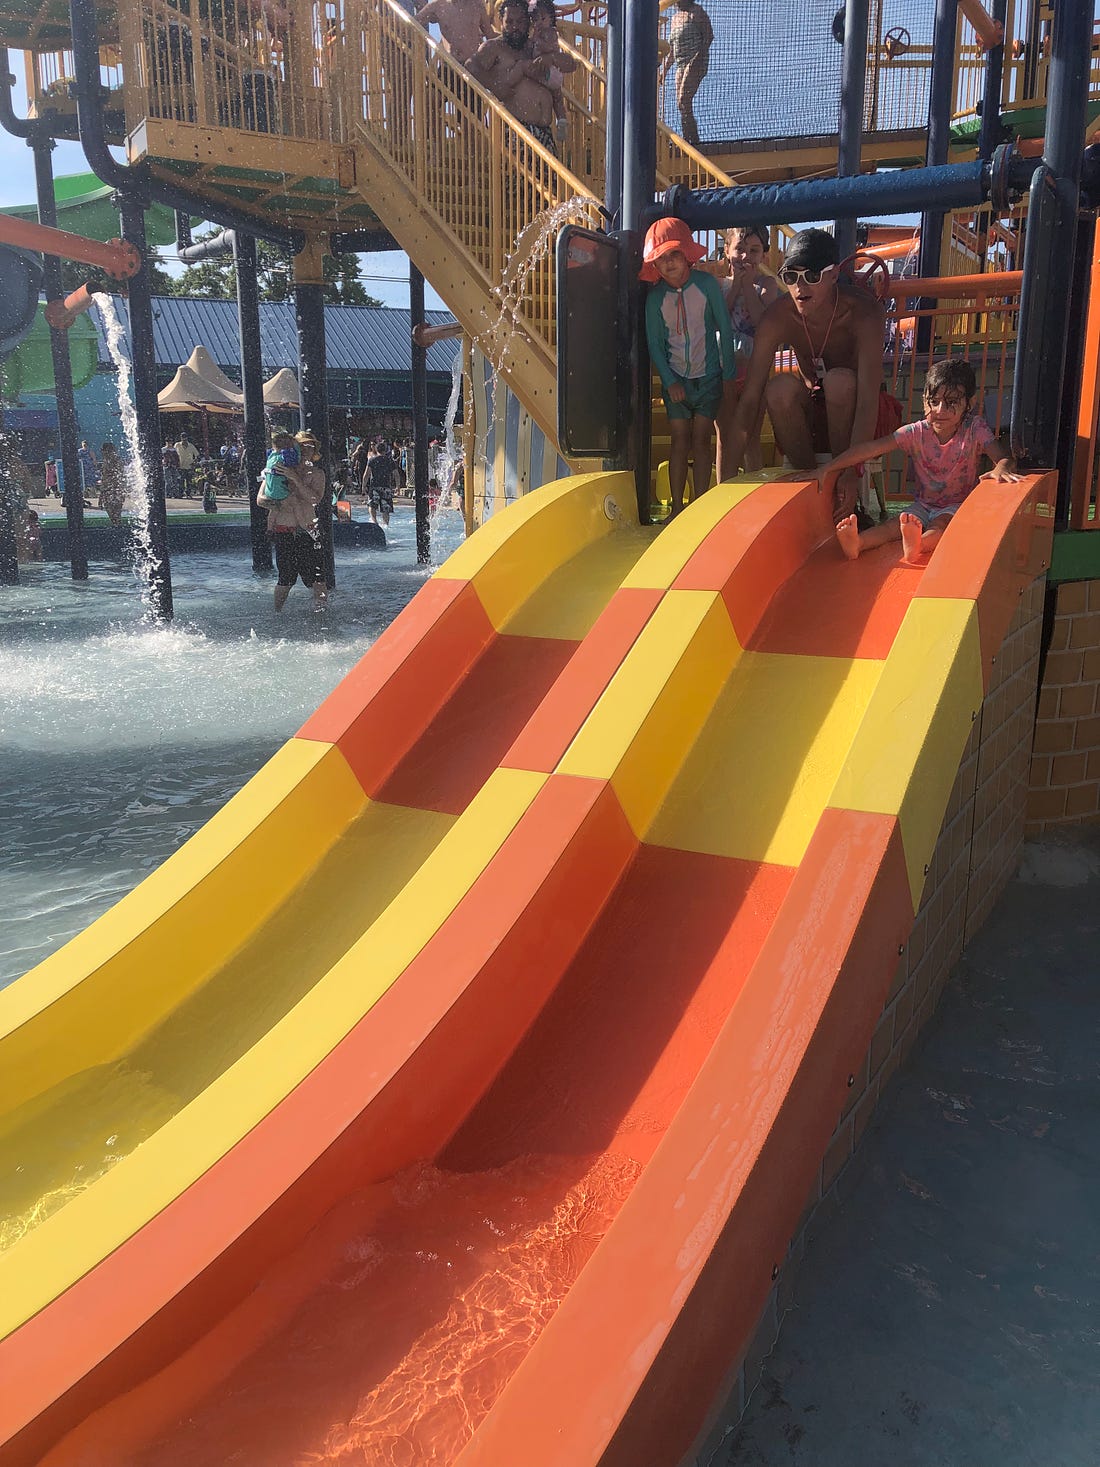 Photo shows a climbing structure with a small side-by-side water slide with two kids and a lifeguard.